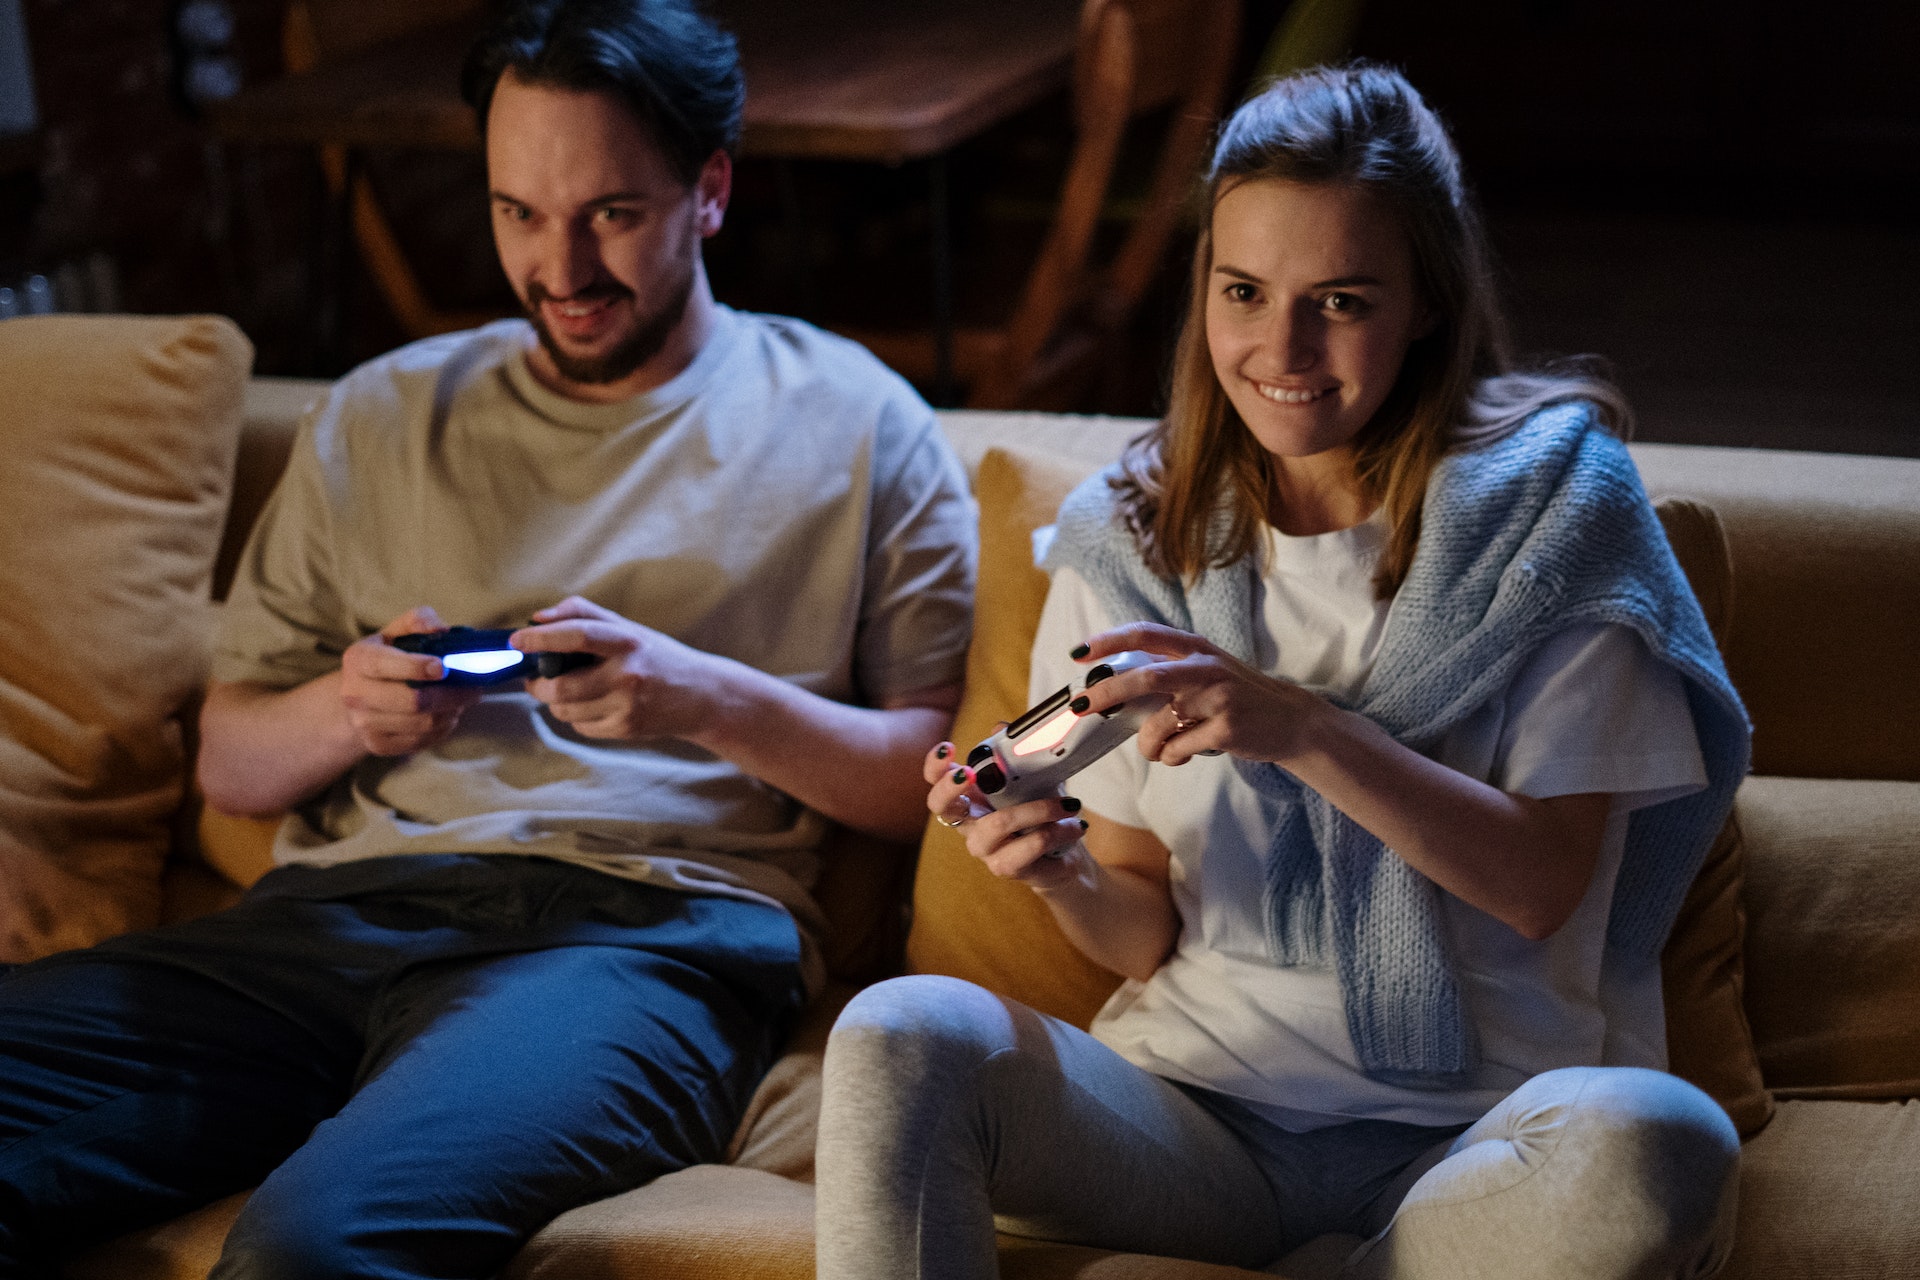 A man and a woman playing a video game | Source: Pexels